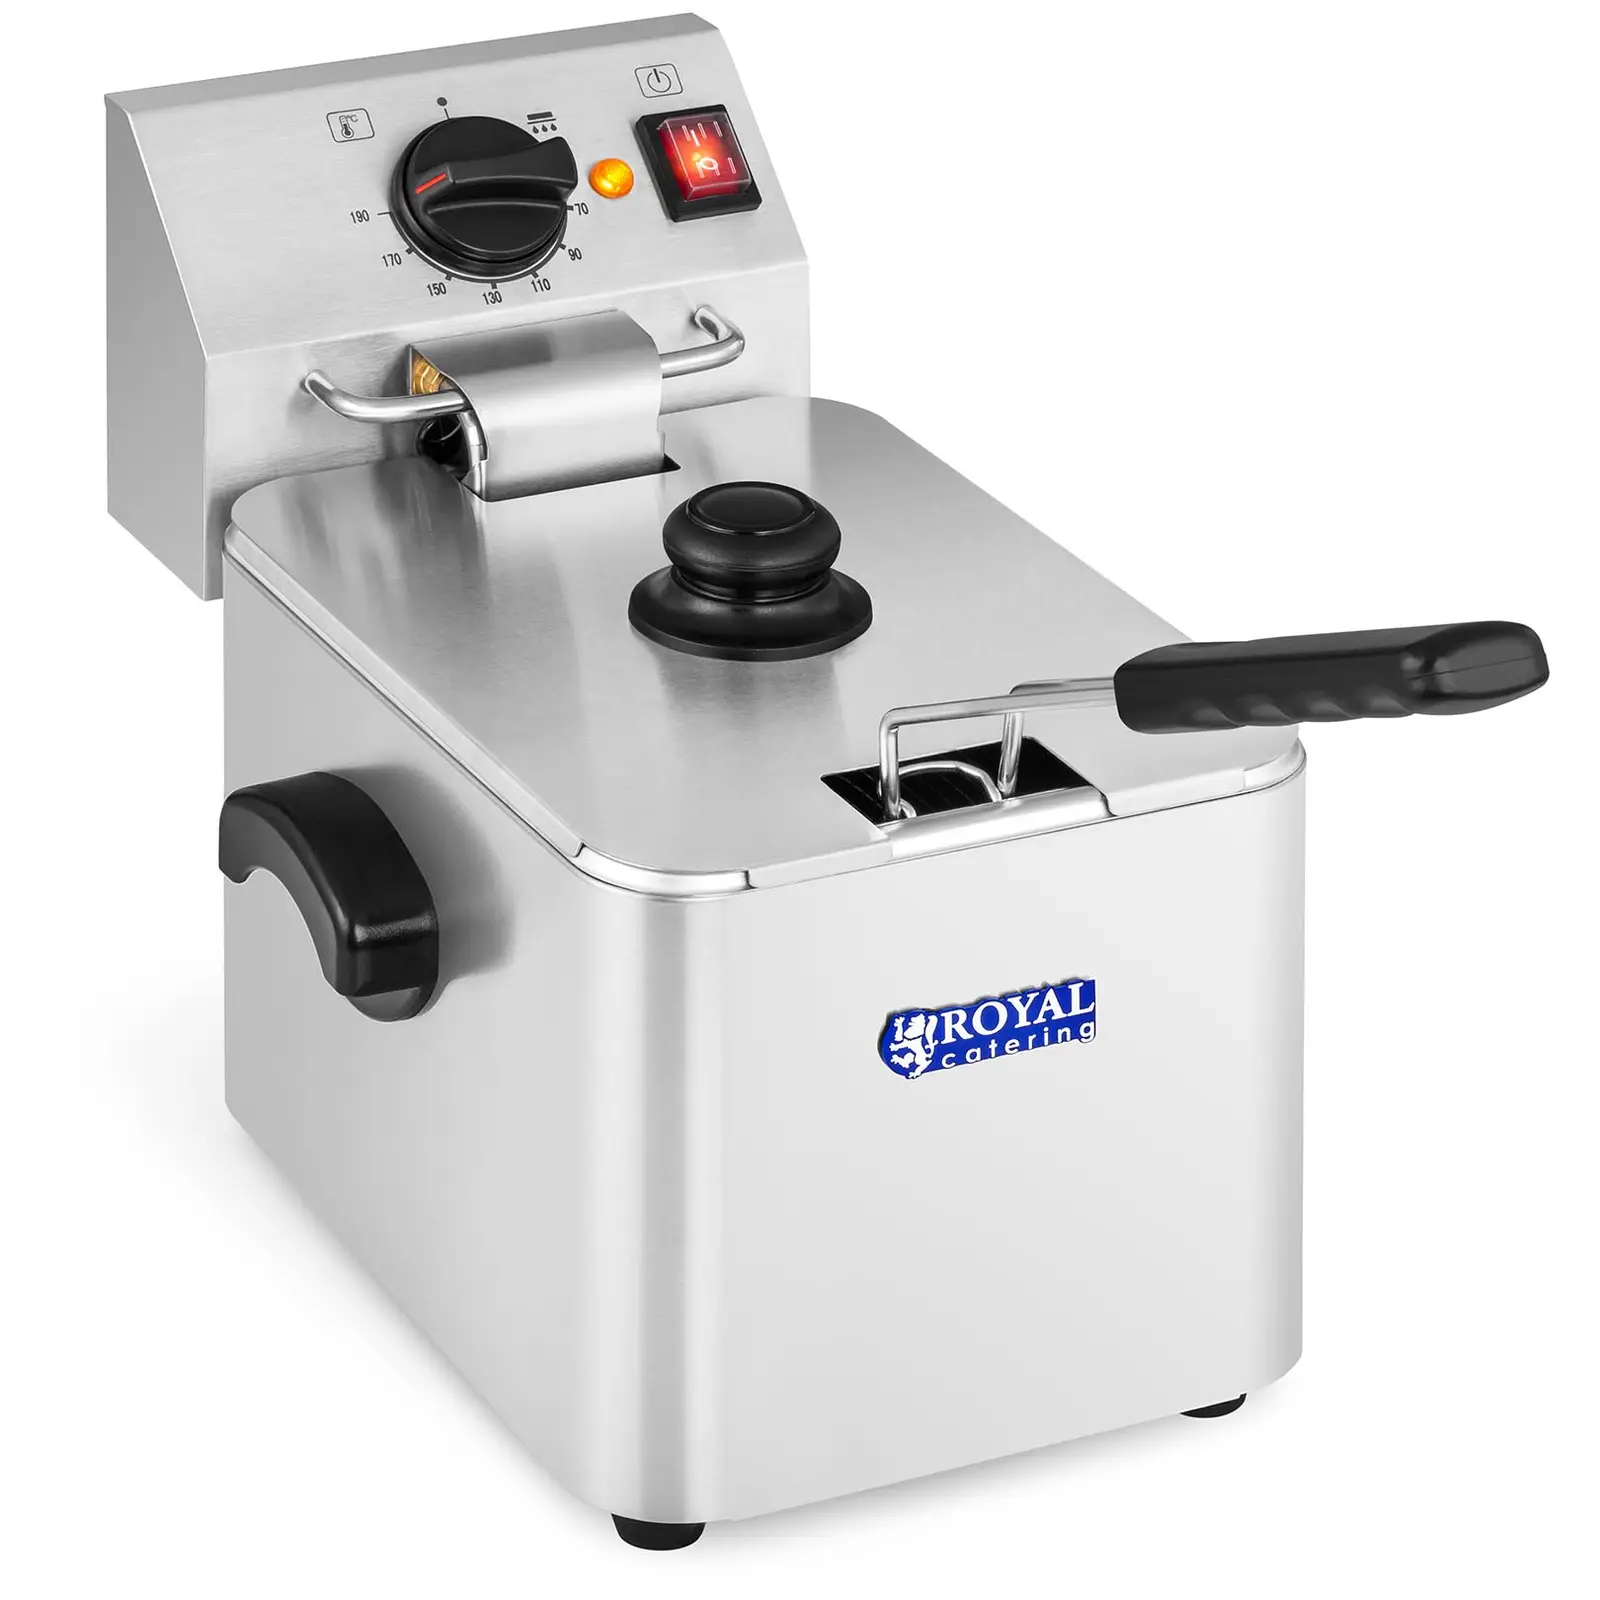 Electrical fryer - 8 L - EGO Thermostat